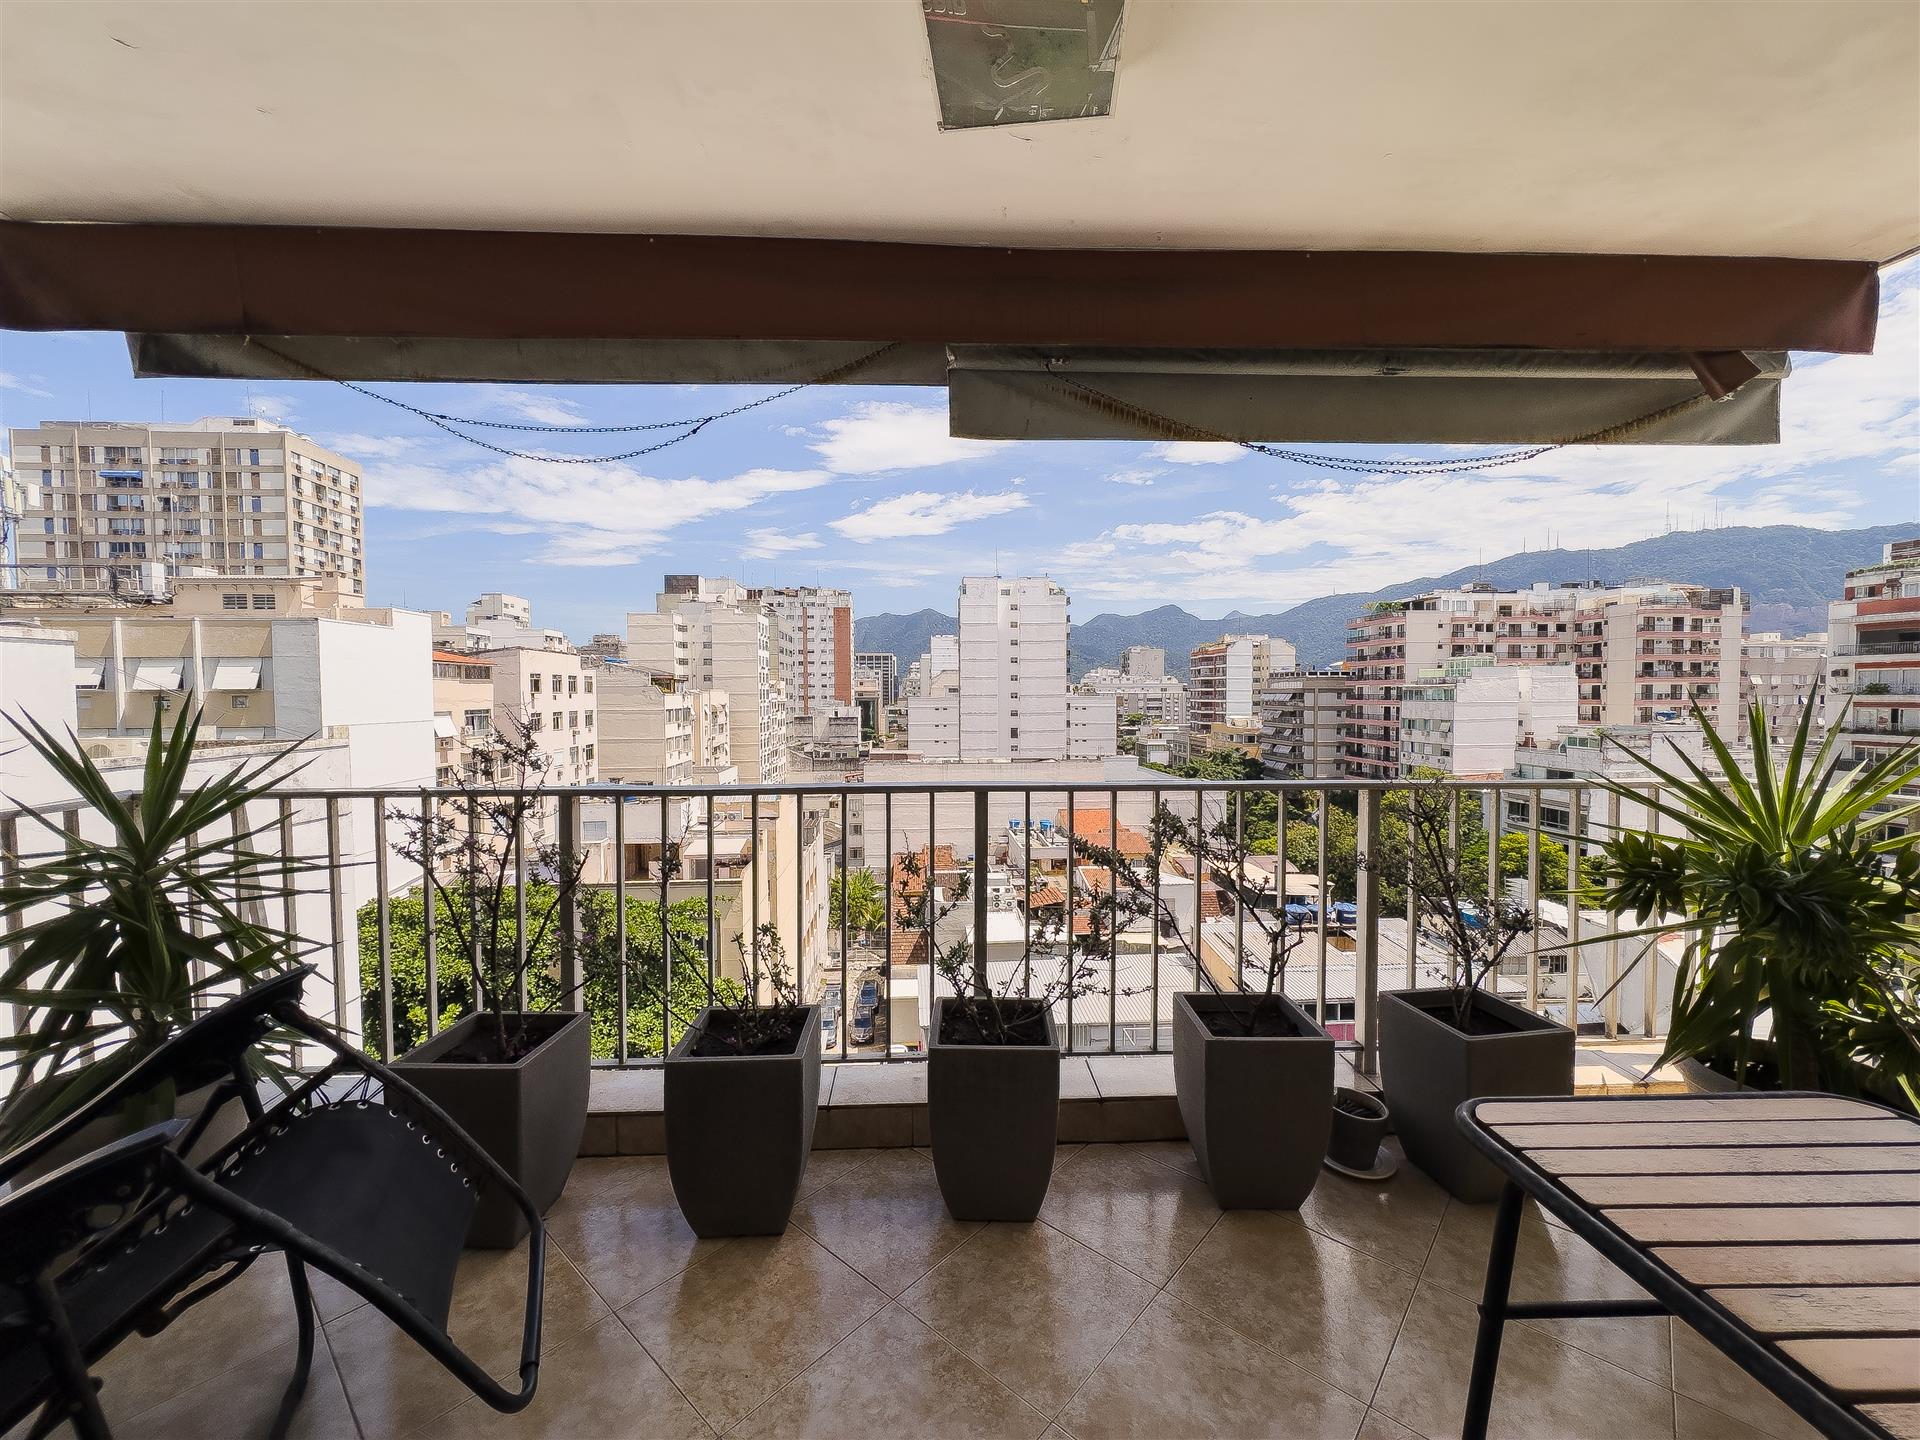 Apartment with balcony and view of Christ the Redeemer for sale in Ipanema.